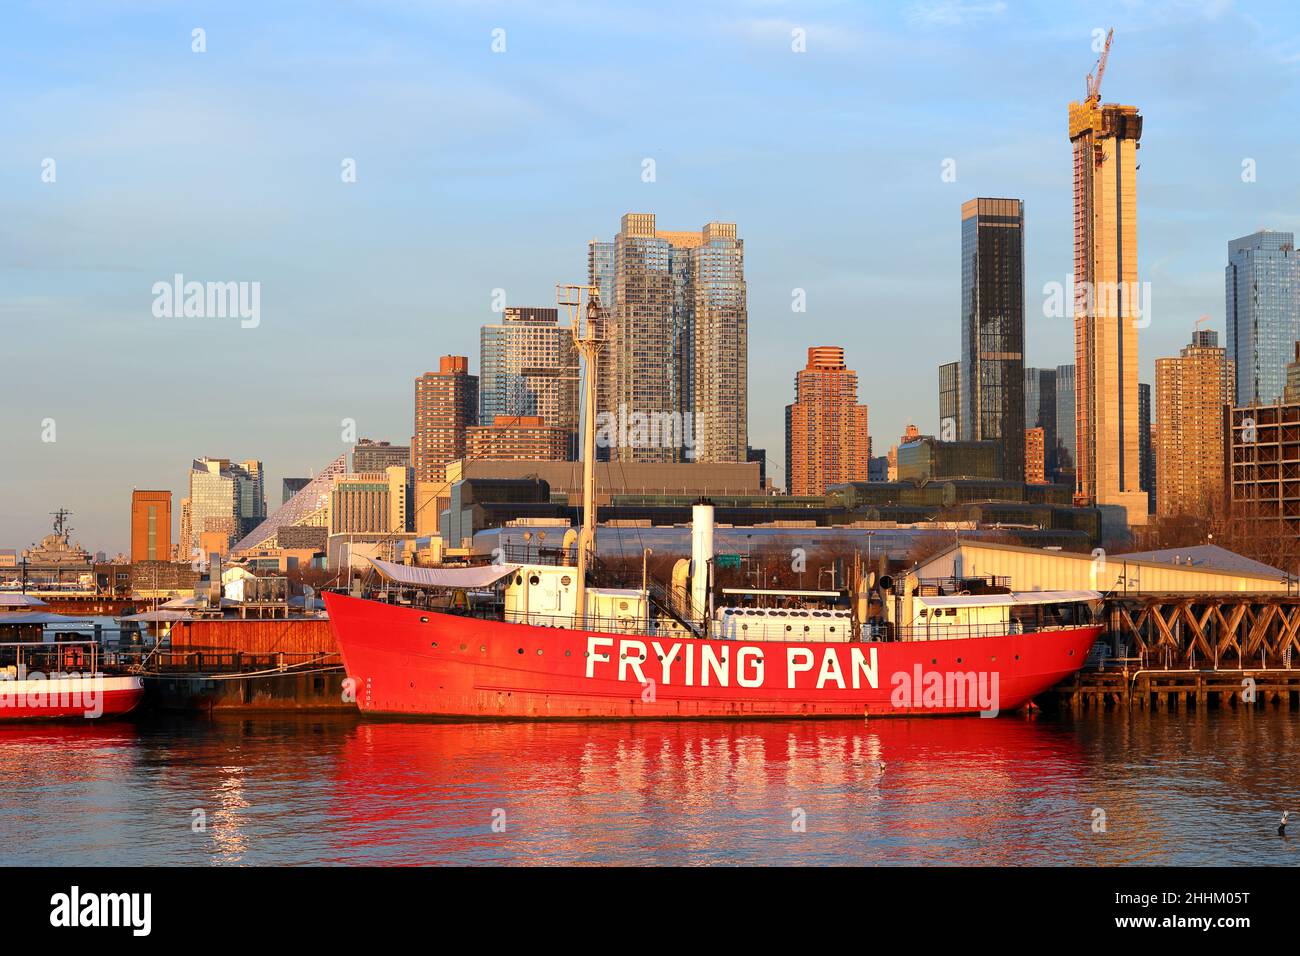 The Frying Pan lightship at Pier 66, Hudson River Park, New York. a historic ship at golden hour with the midtown manhattan skyline in the background. Stock Photo